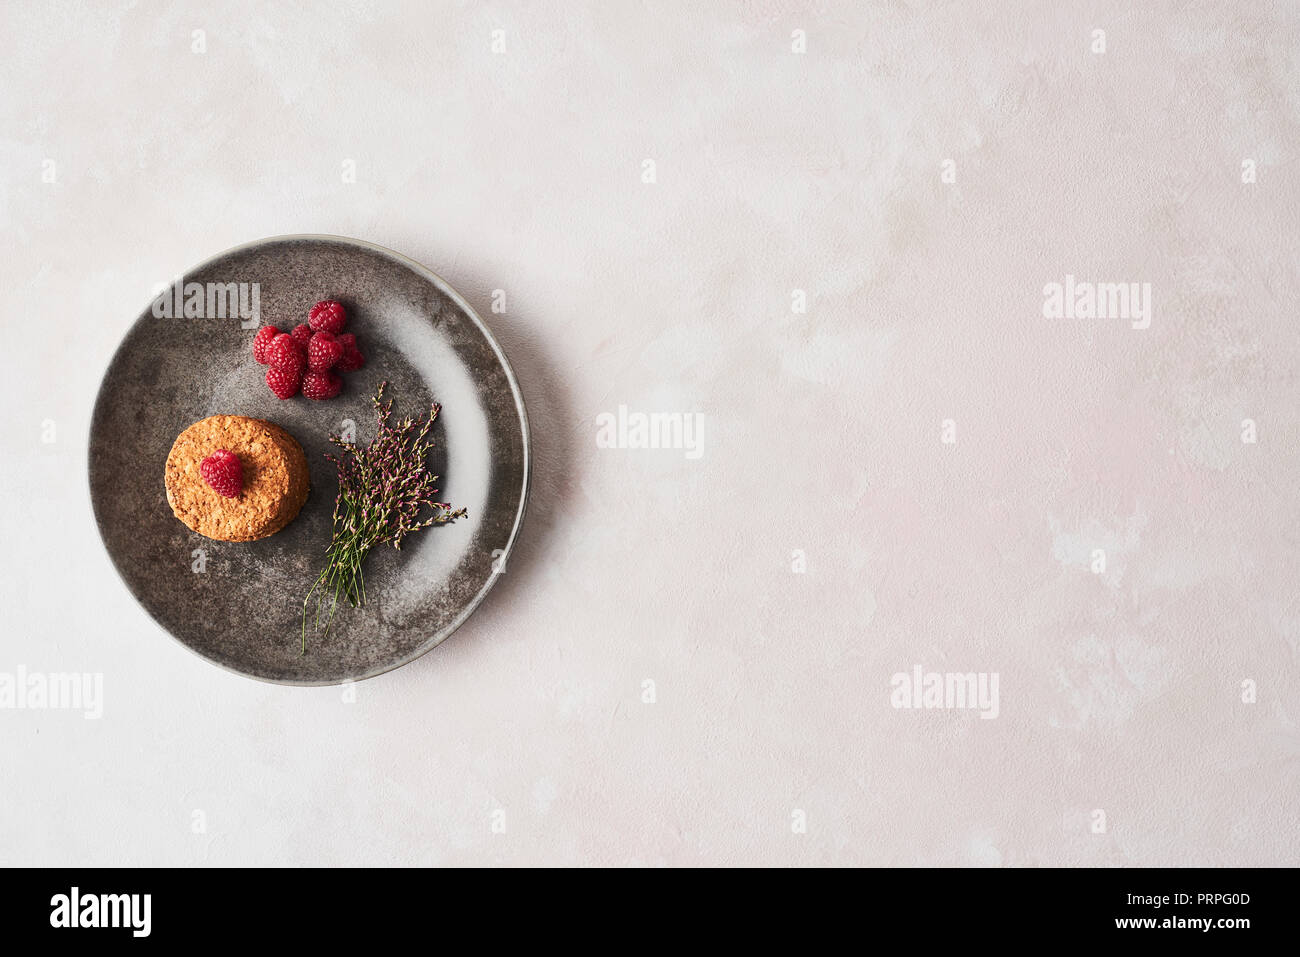 Whole grain cookies with raspberries in a dark rustic plate on pink background. Top view with copy space. Stock Photo